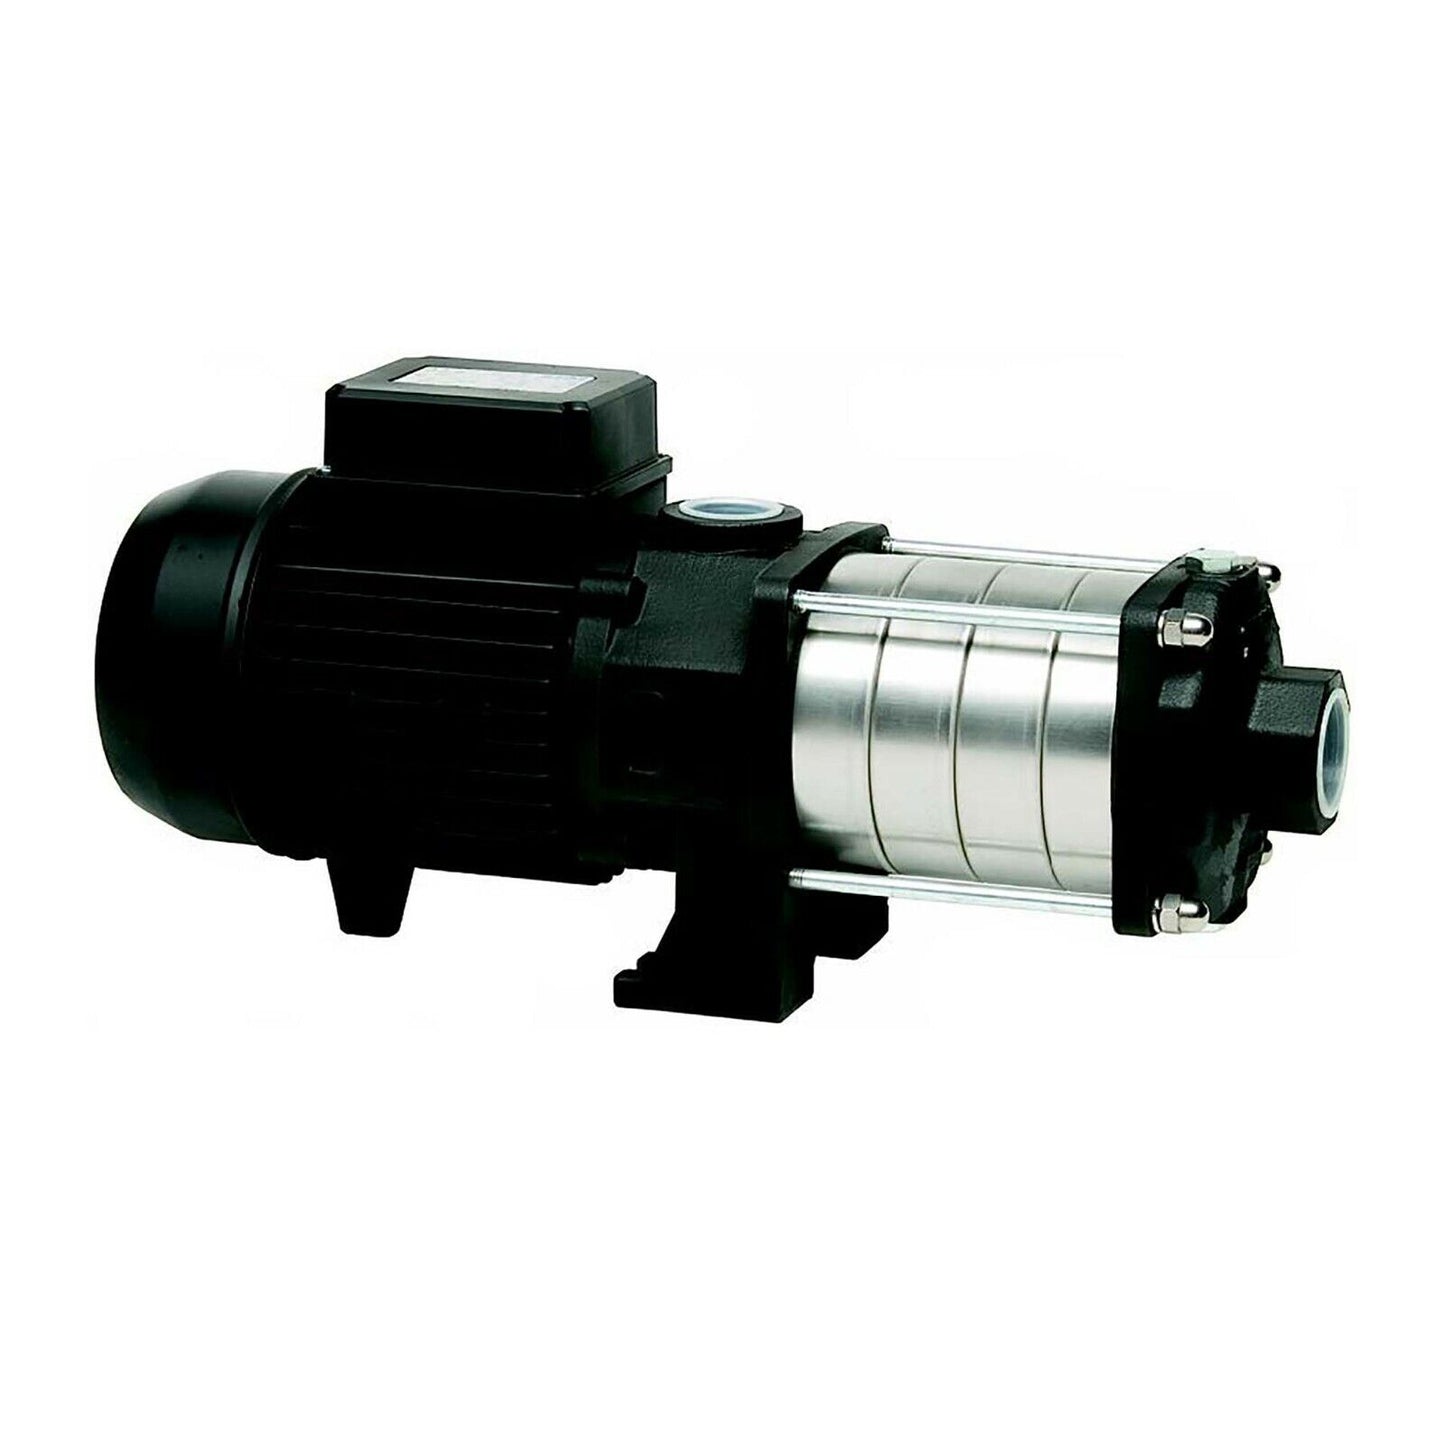 WATER PUMP 1.25" In & 1" Out - 2370 GPH - 230V - 2HP - 1 Ph - 2 Stage Horizontal